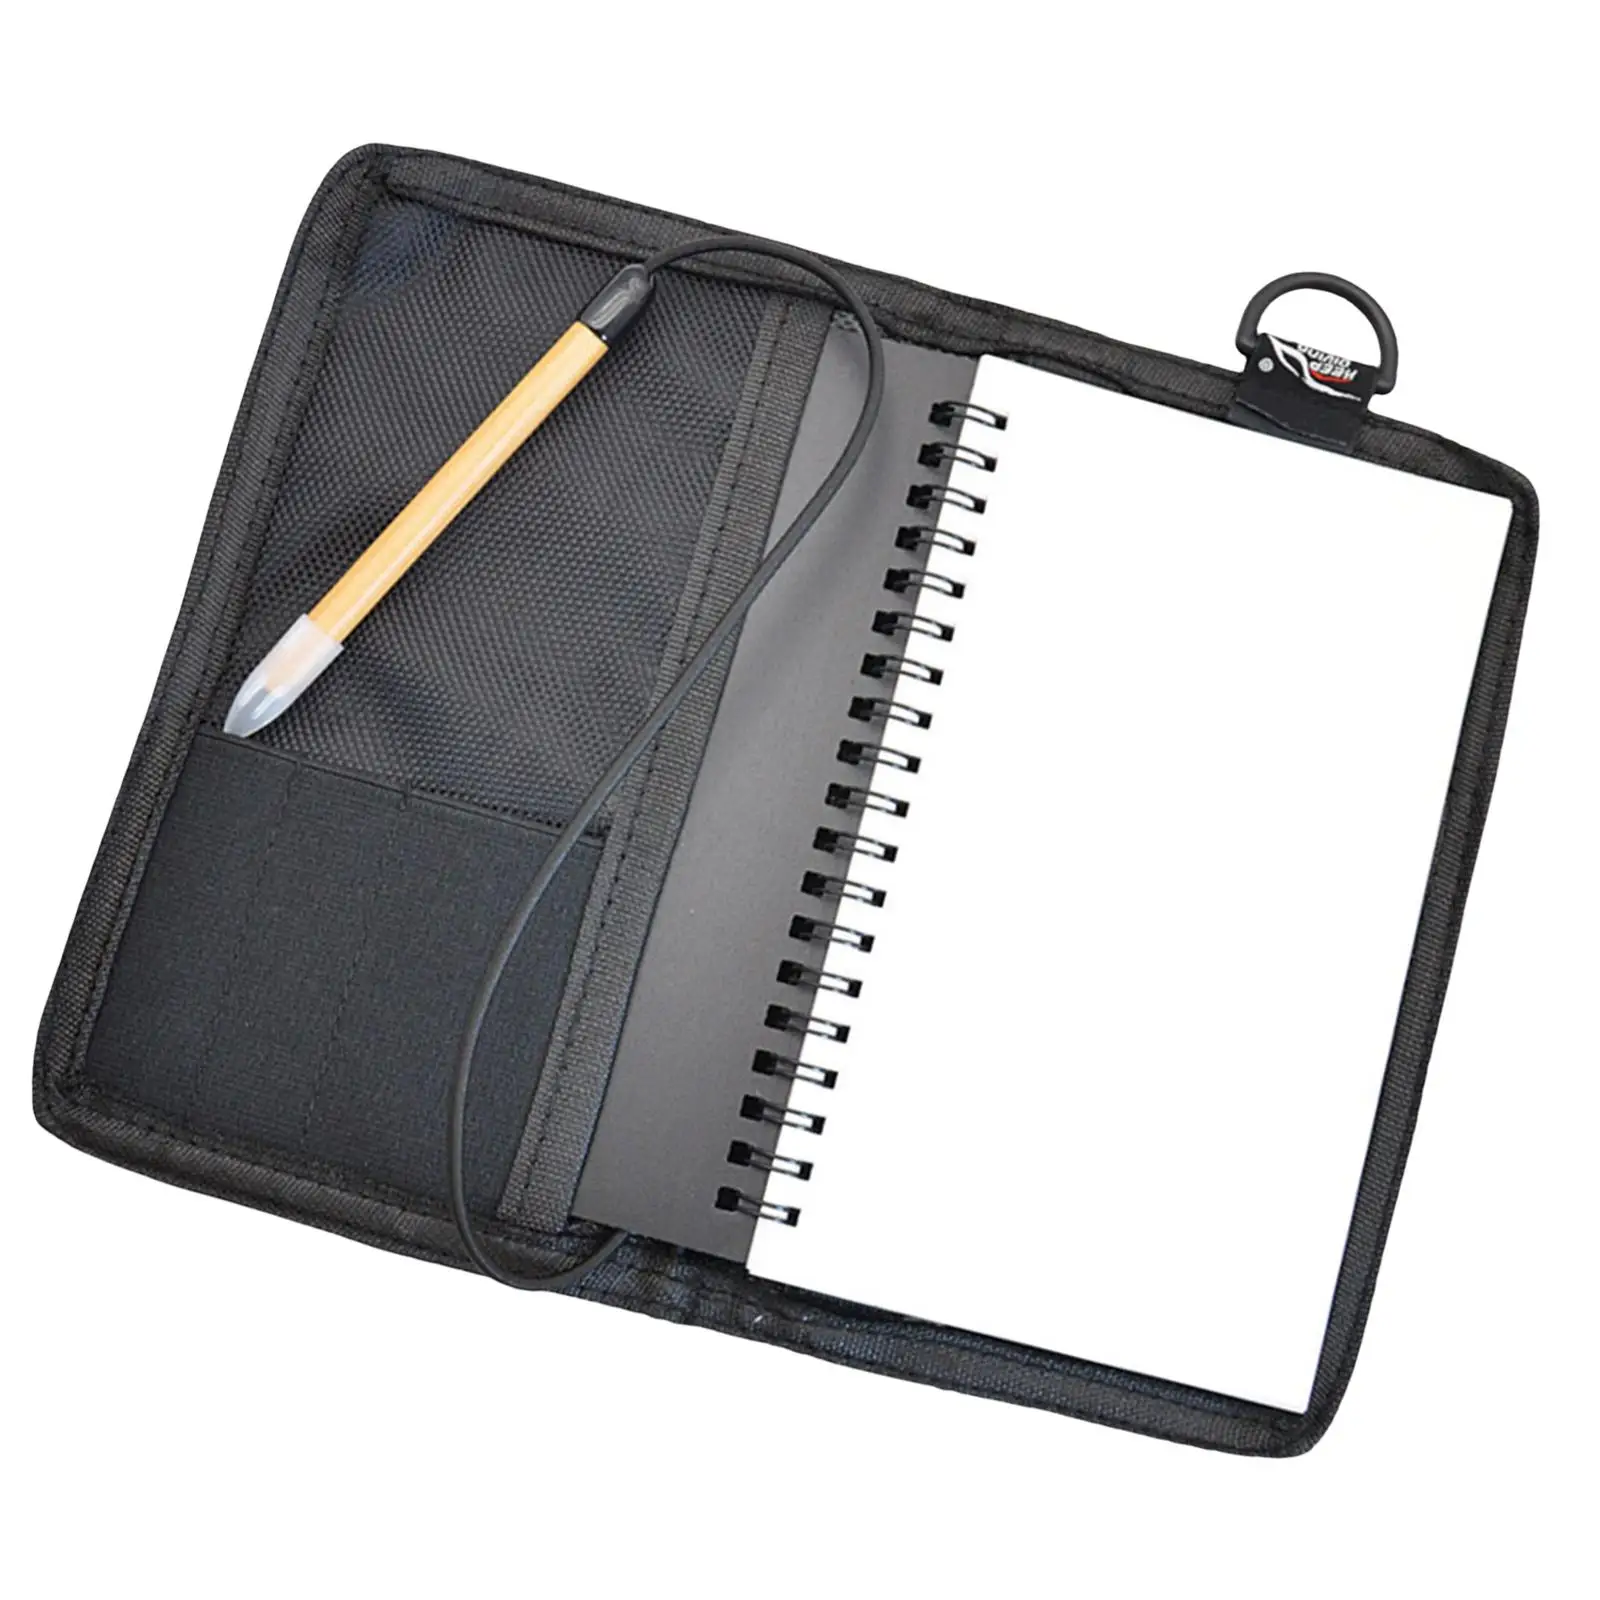 Underwater Notebook with Pencil 50 Pages Waterproof Paper for Water Sports